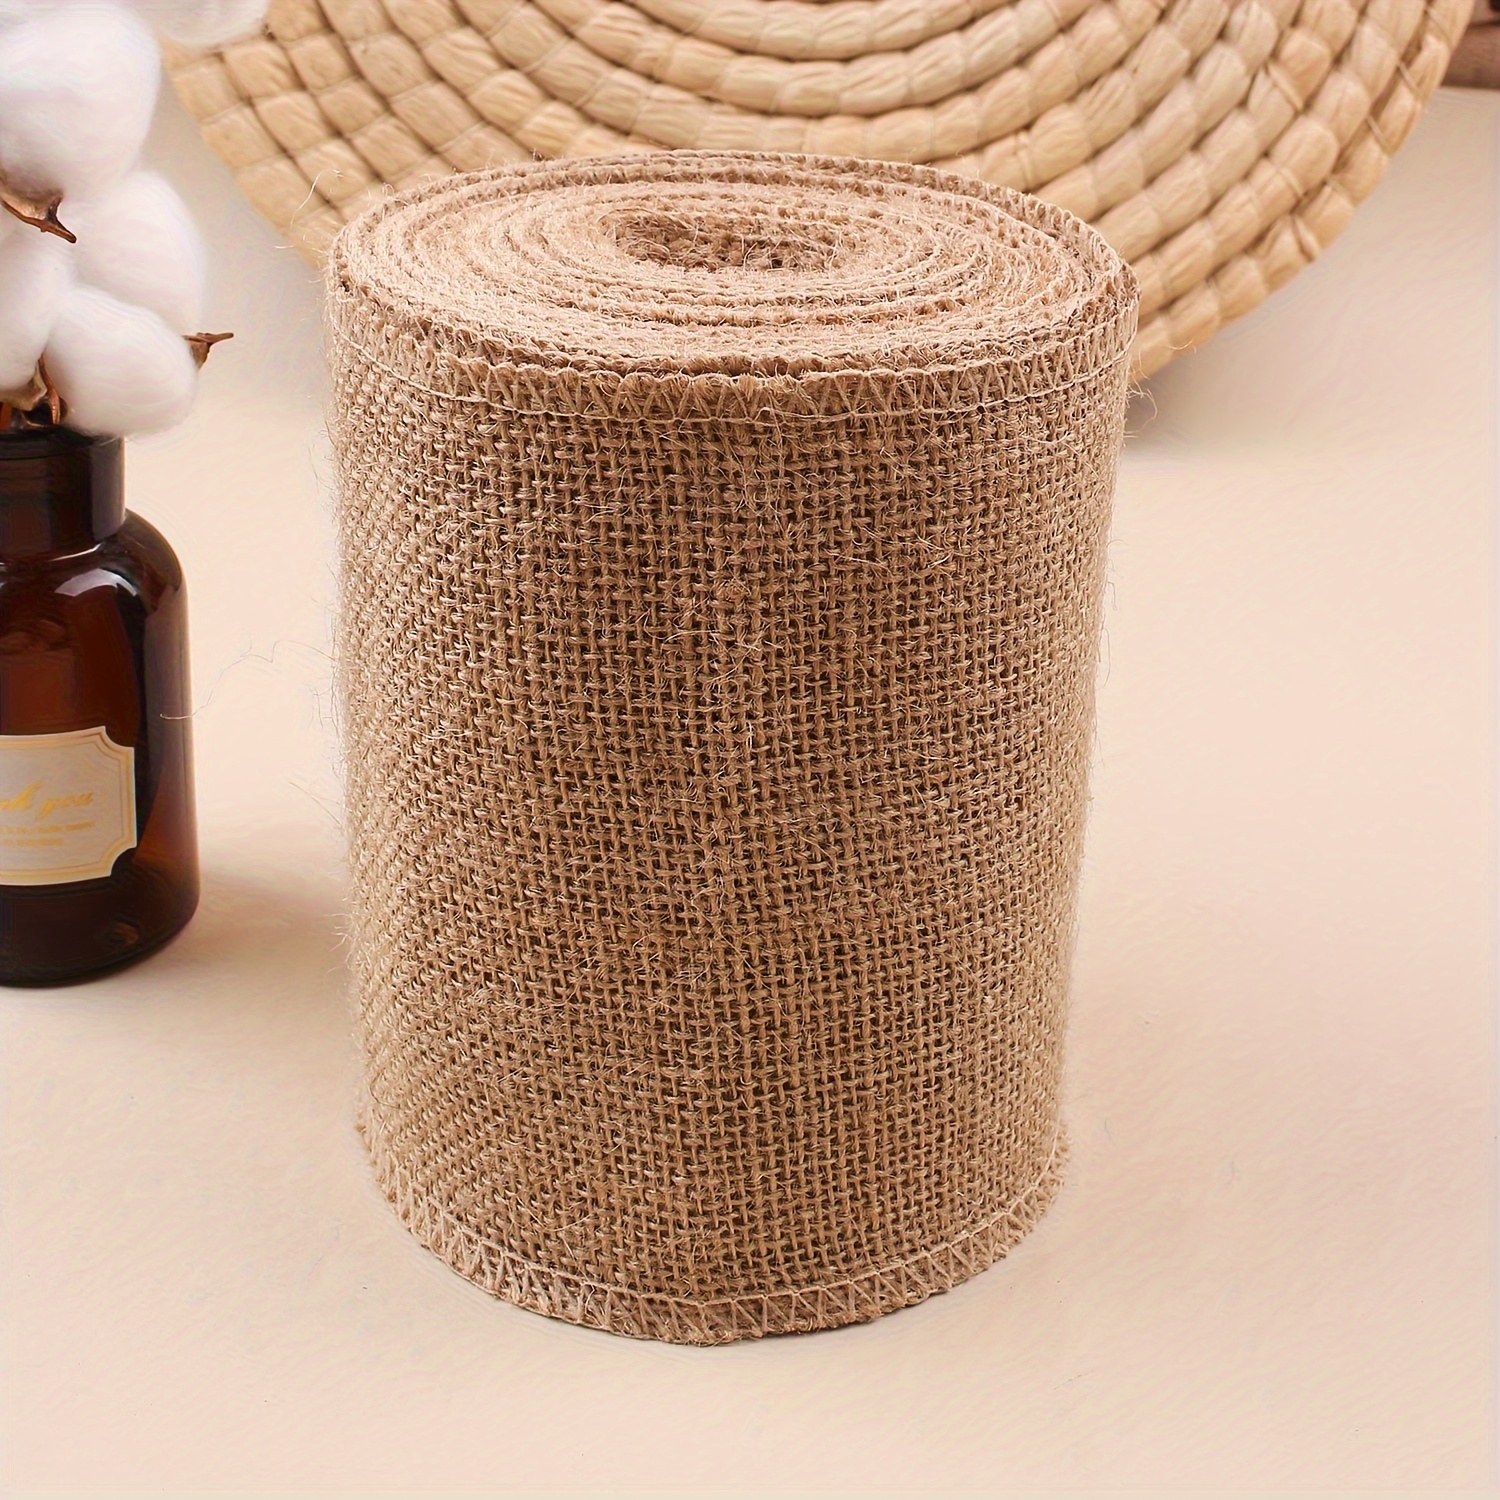 

1 Roll 15cm Wood Color Burlap Webbing Burlap Roll, Table Flag Chair Back Crafts Making Material 10m